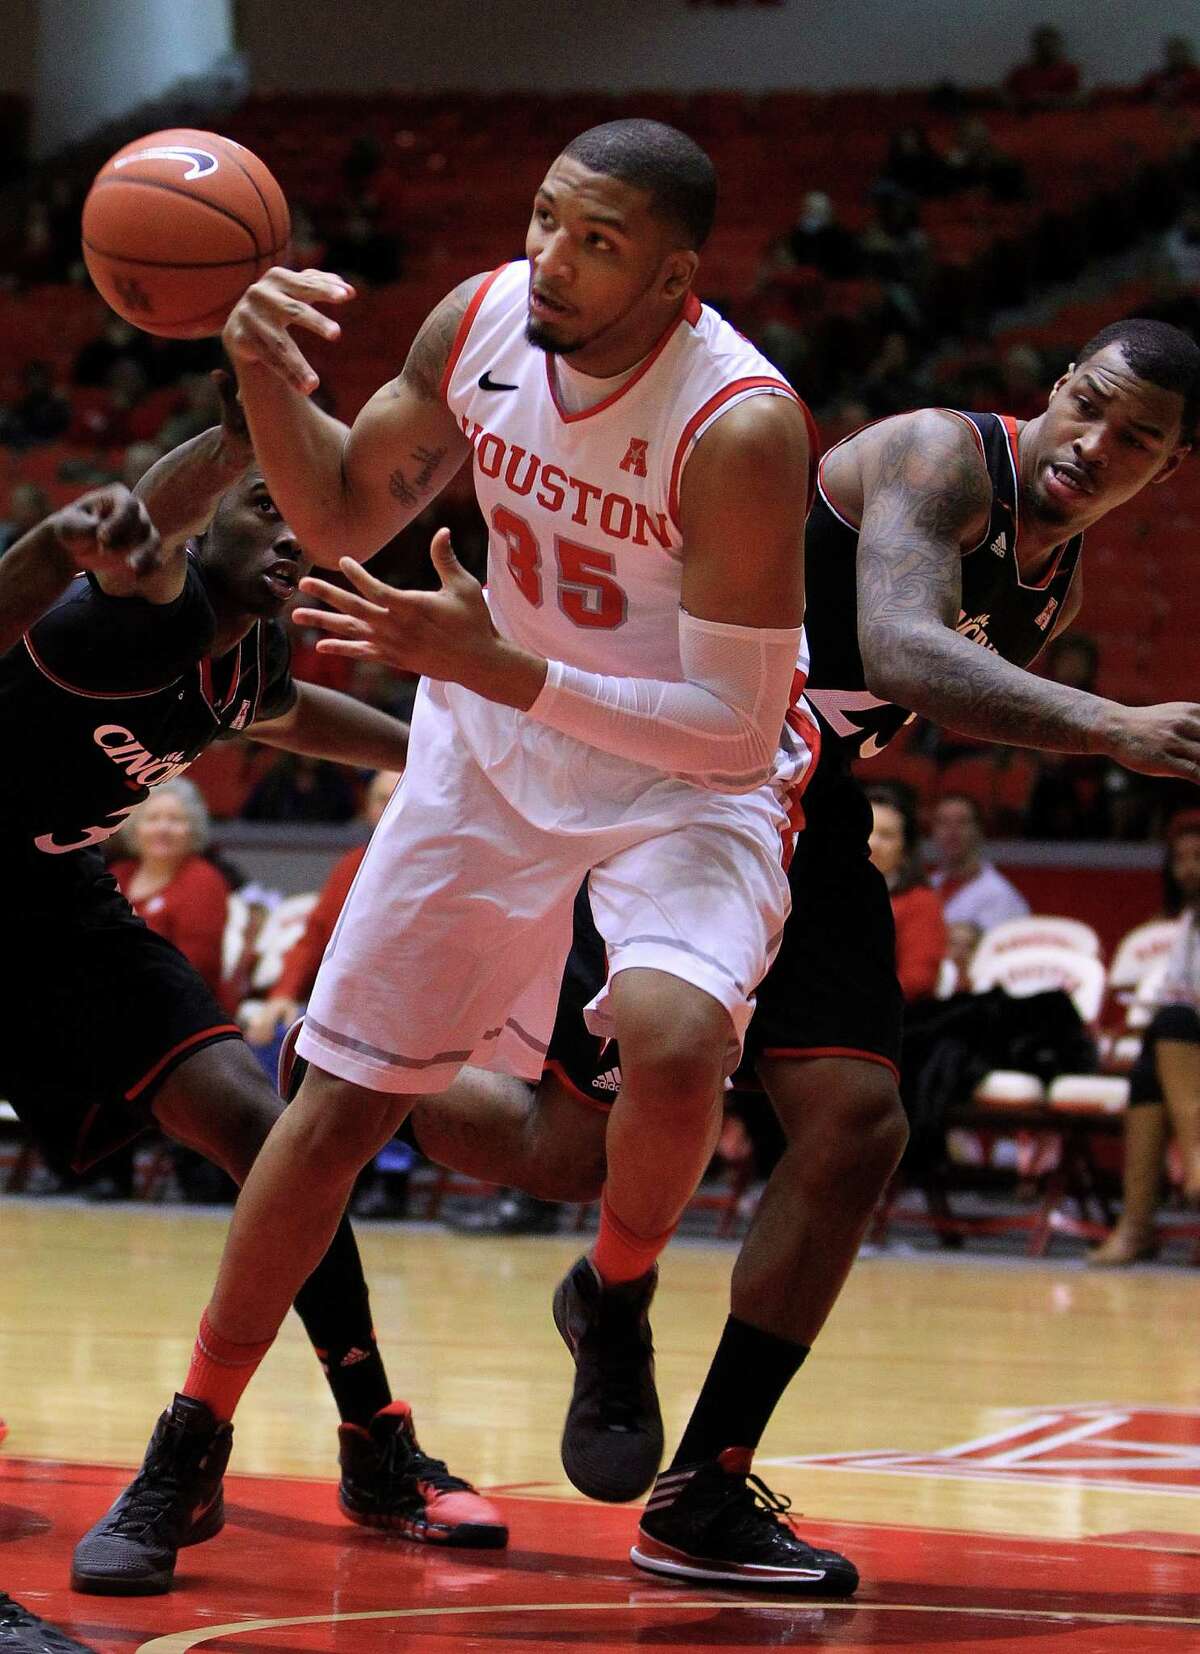 Houston Cougars forward TaShawn Thomas (35) gets the ball stripped from him by Cincinnati Bearcats forward Shaquille Thomas (3) and guard Sean Kilpatrick (23) during the first half of a college basketball game at Hofheinz Pavilion, Tuesday, Jan. 7, 2014, in Houston.